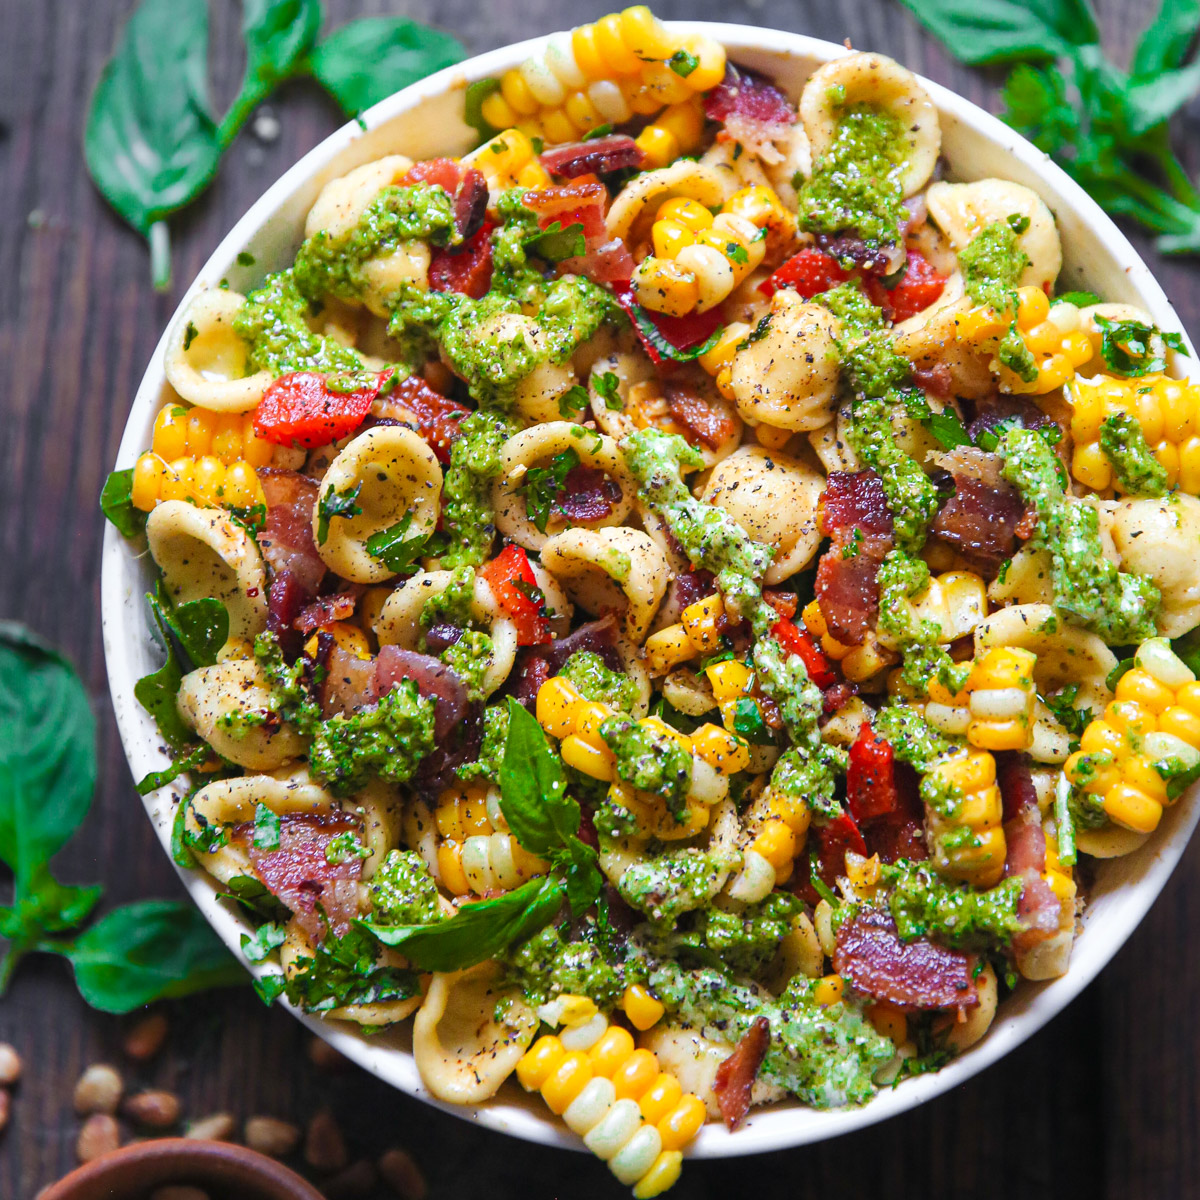 Corn Bacon Pasta Salad with Bell Peppers and Creamy Pesto Dressing - in a white bowl.